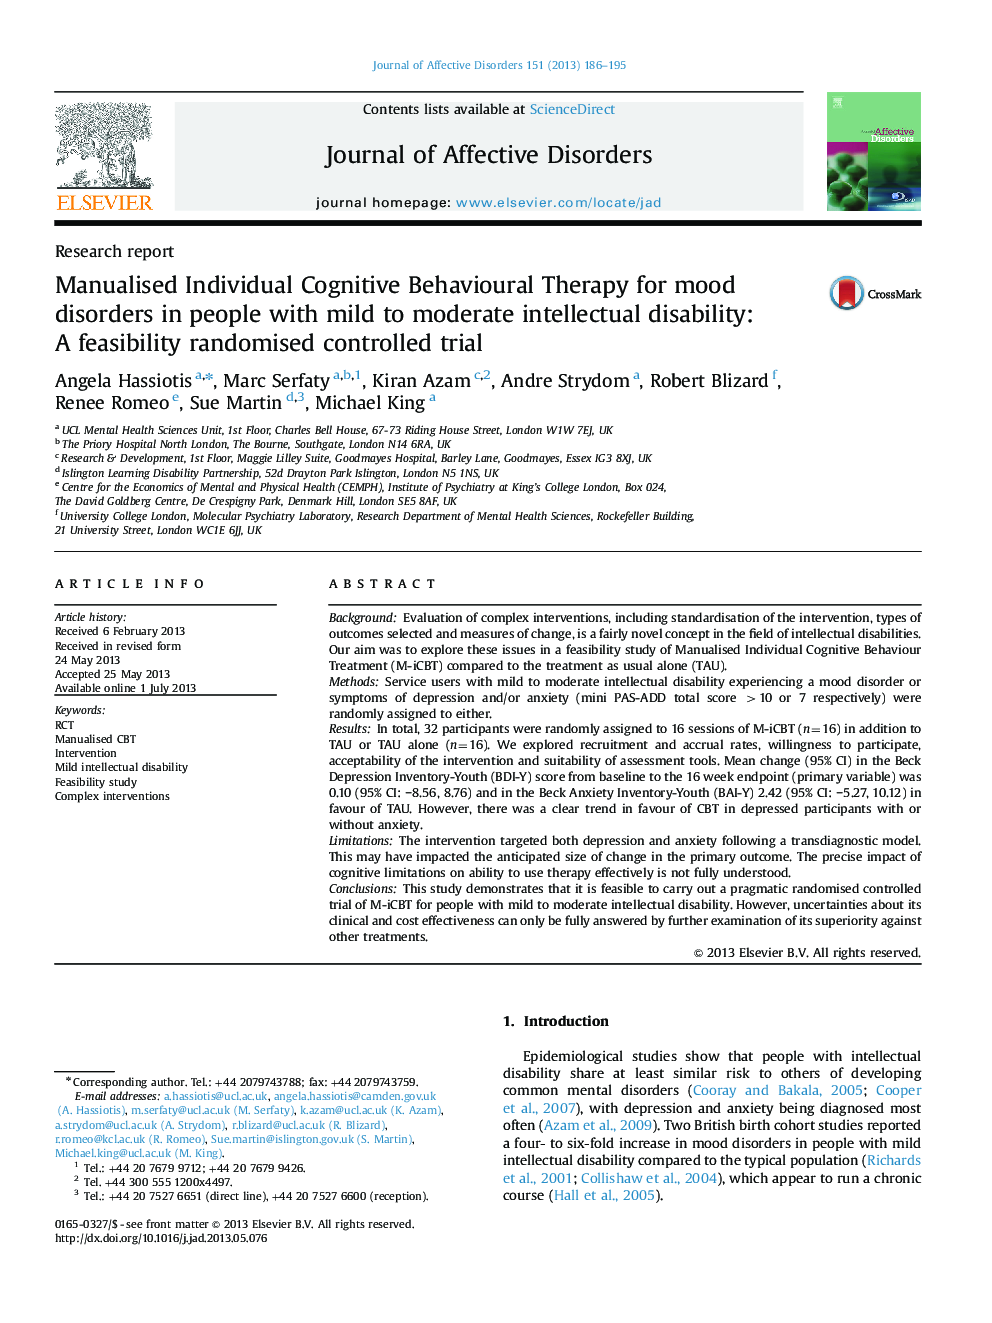 Manualised Individual Cognitive Behavioural Therapy for mood disorders in people with mild to moderate intellectual disability: A feasibility randomised controlled trial